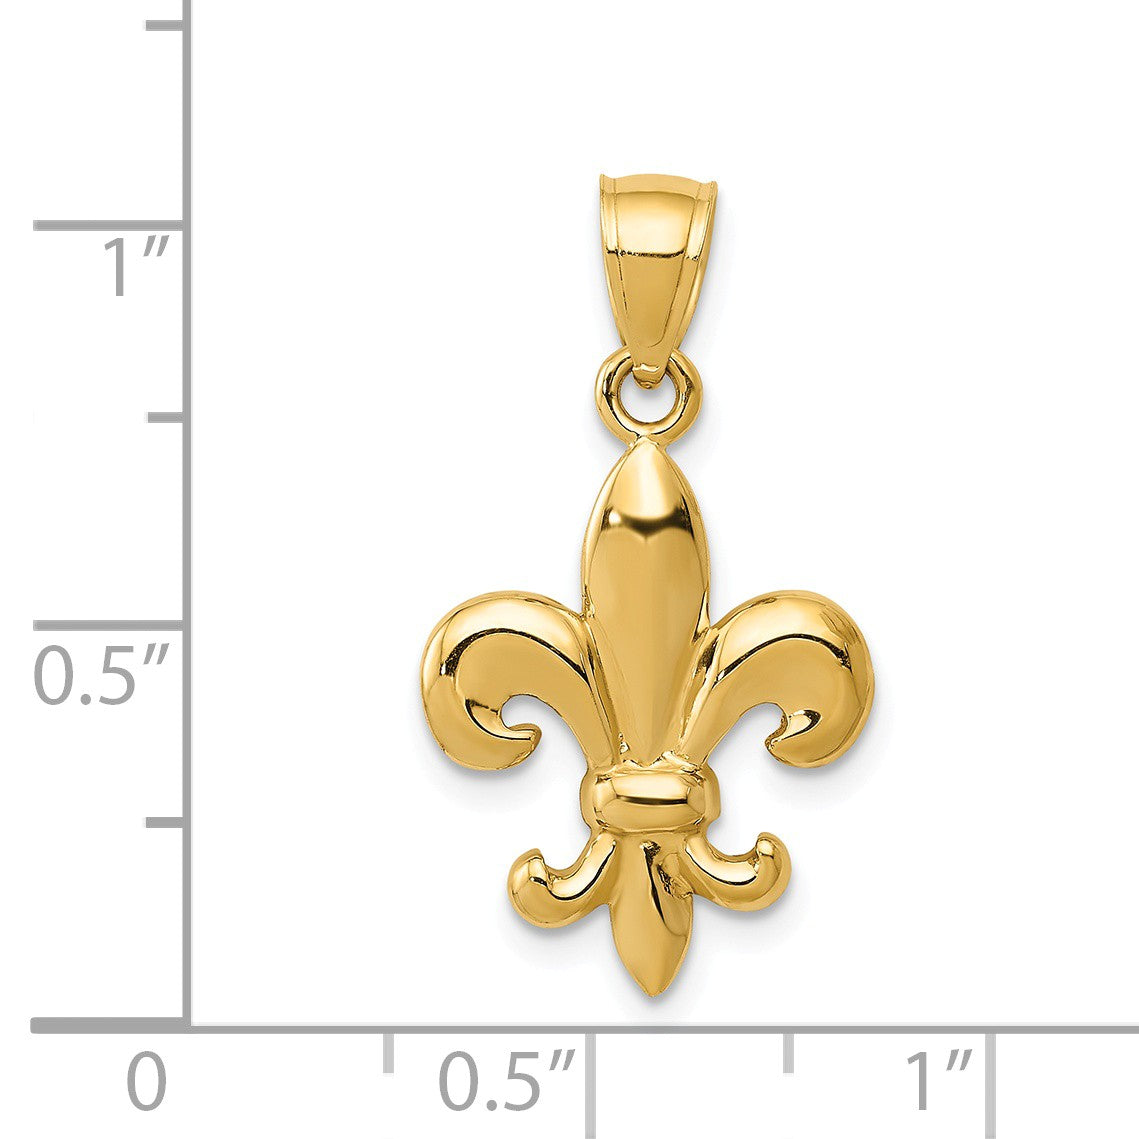 Alternate view of the 14k Yellow Gold Polished 2D Fleur De Lis Pendant, 14mm (9/16 inch) by The Black Bow Jewelry Co.